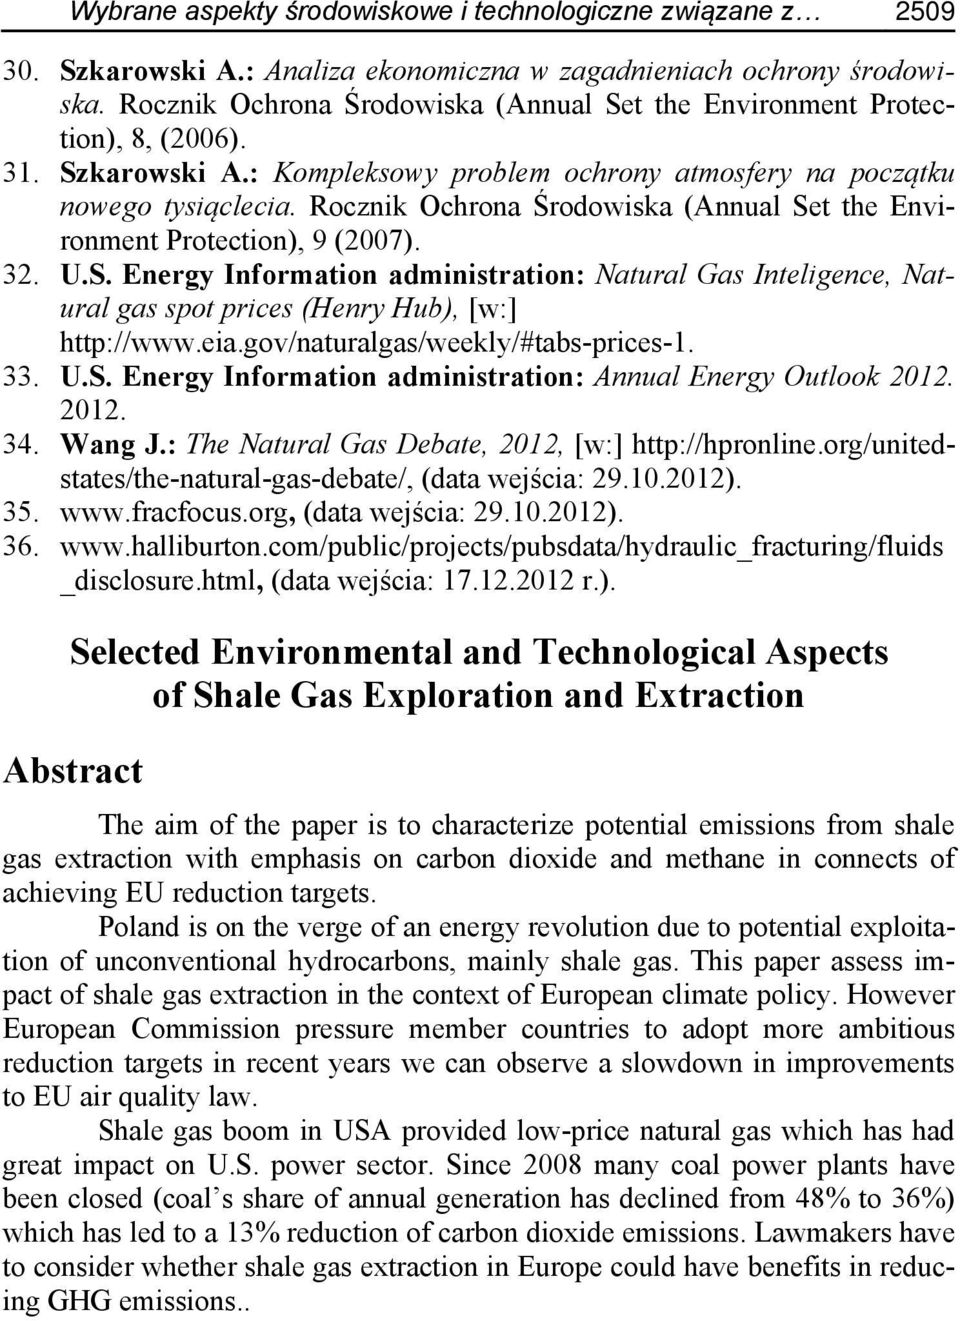 Rocznik Ochrona Środowiska (Annual Set the Environment Protection), 9 (2007). 32. U.S. Energy Information administration: Natural Gas Inteligence, Natural gas spot prices (Henry Hub), [w:] http://www.